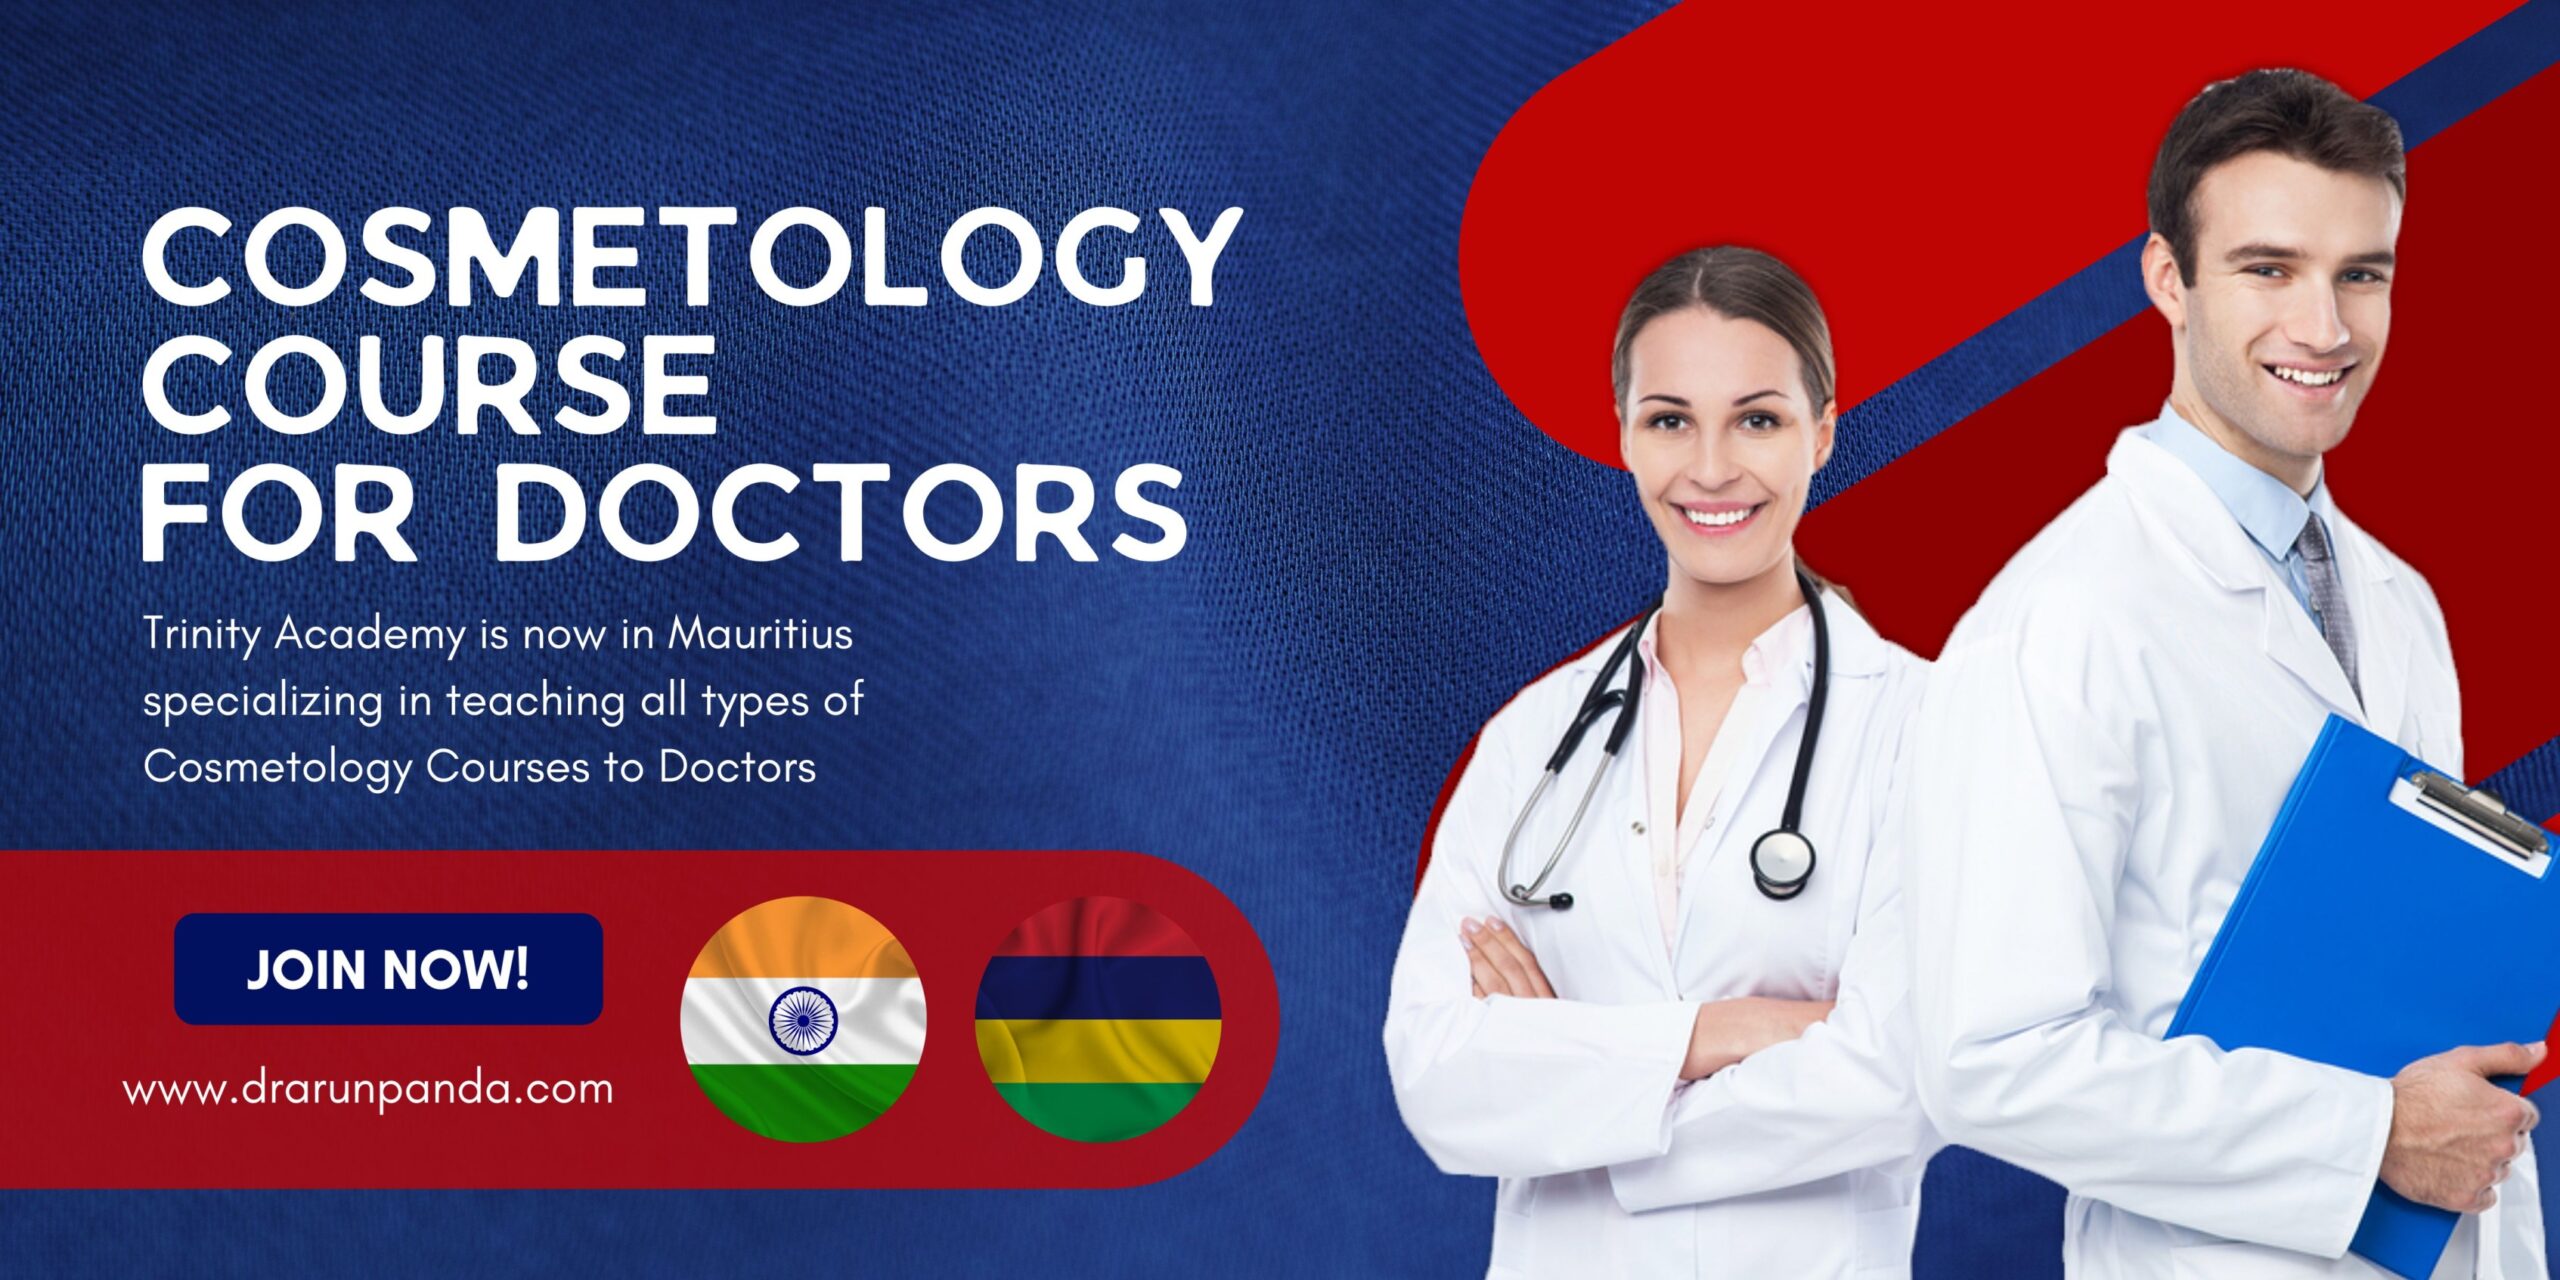 You are currently viewing Trinity Cosmetology Course Academy in India for Doctors is now Affiliated with CML in Mauritius.